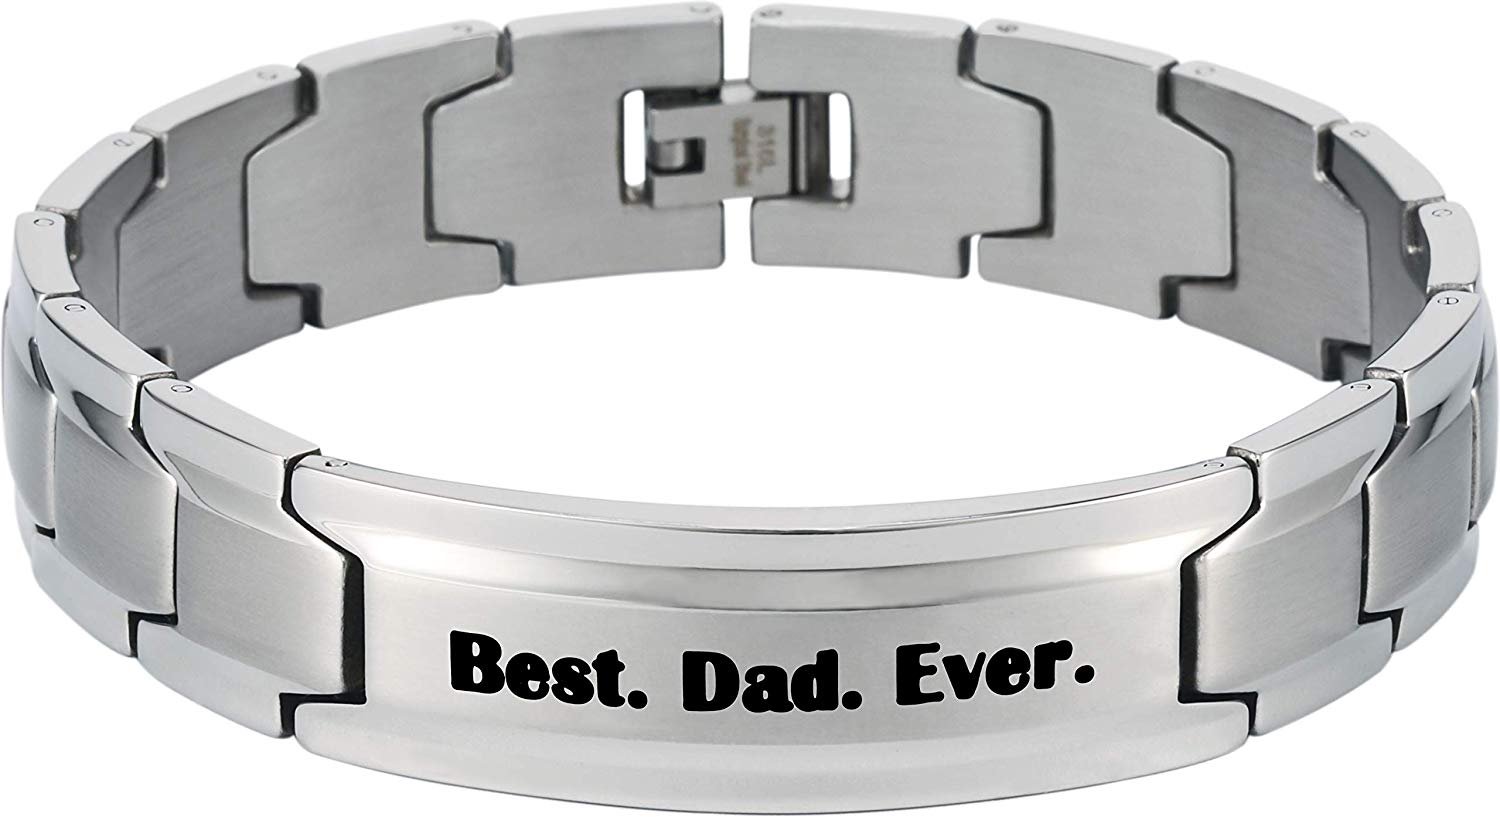 Smarter LifeStyle Elegant DAD & Father Themed Surgical Grade Steel Men's Bracelet Gift, Many Styles to Choose from (Best. Dad. Ever. - Silver) - Smarter LifeStyle Shop